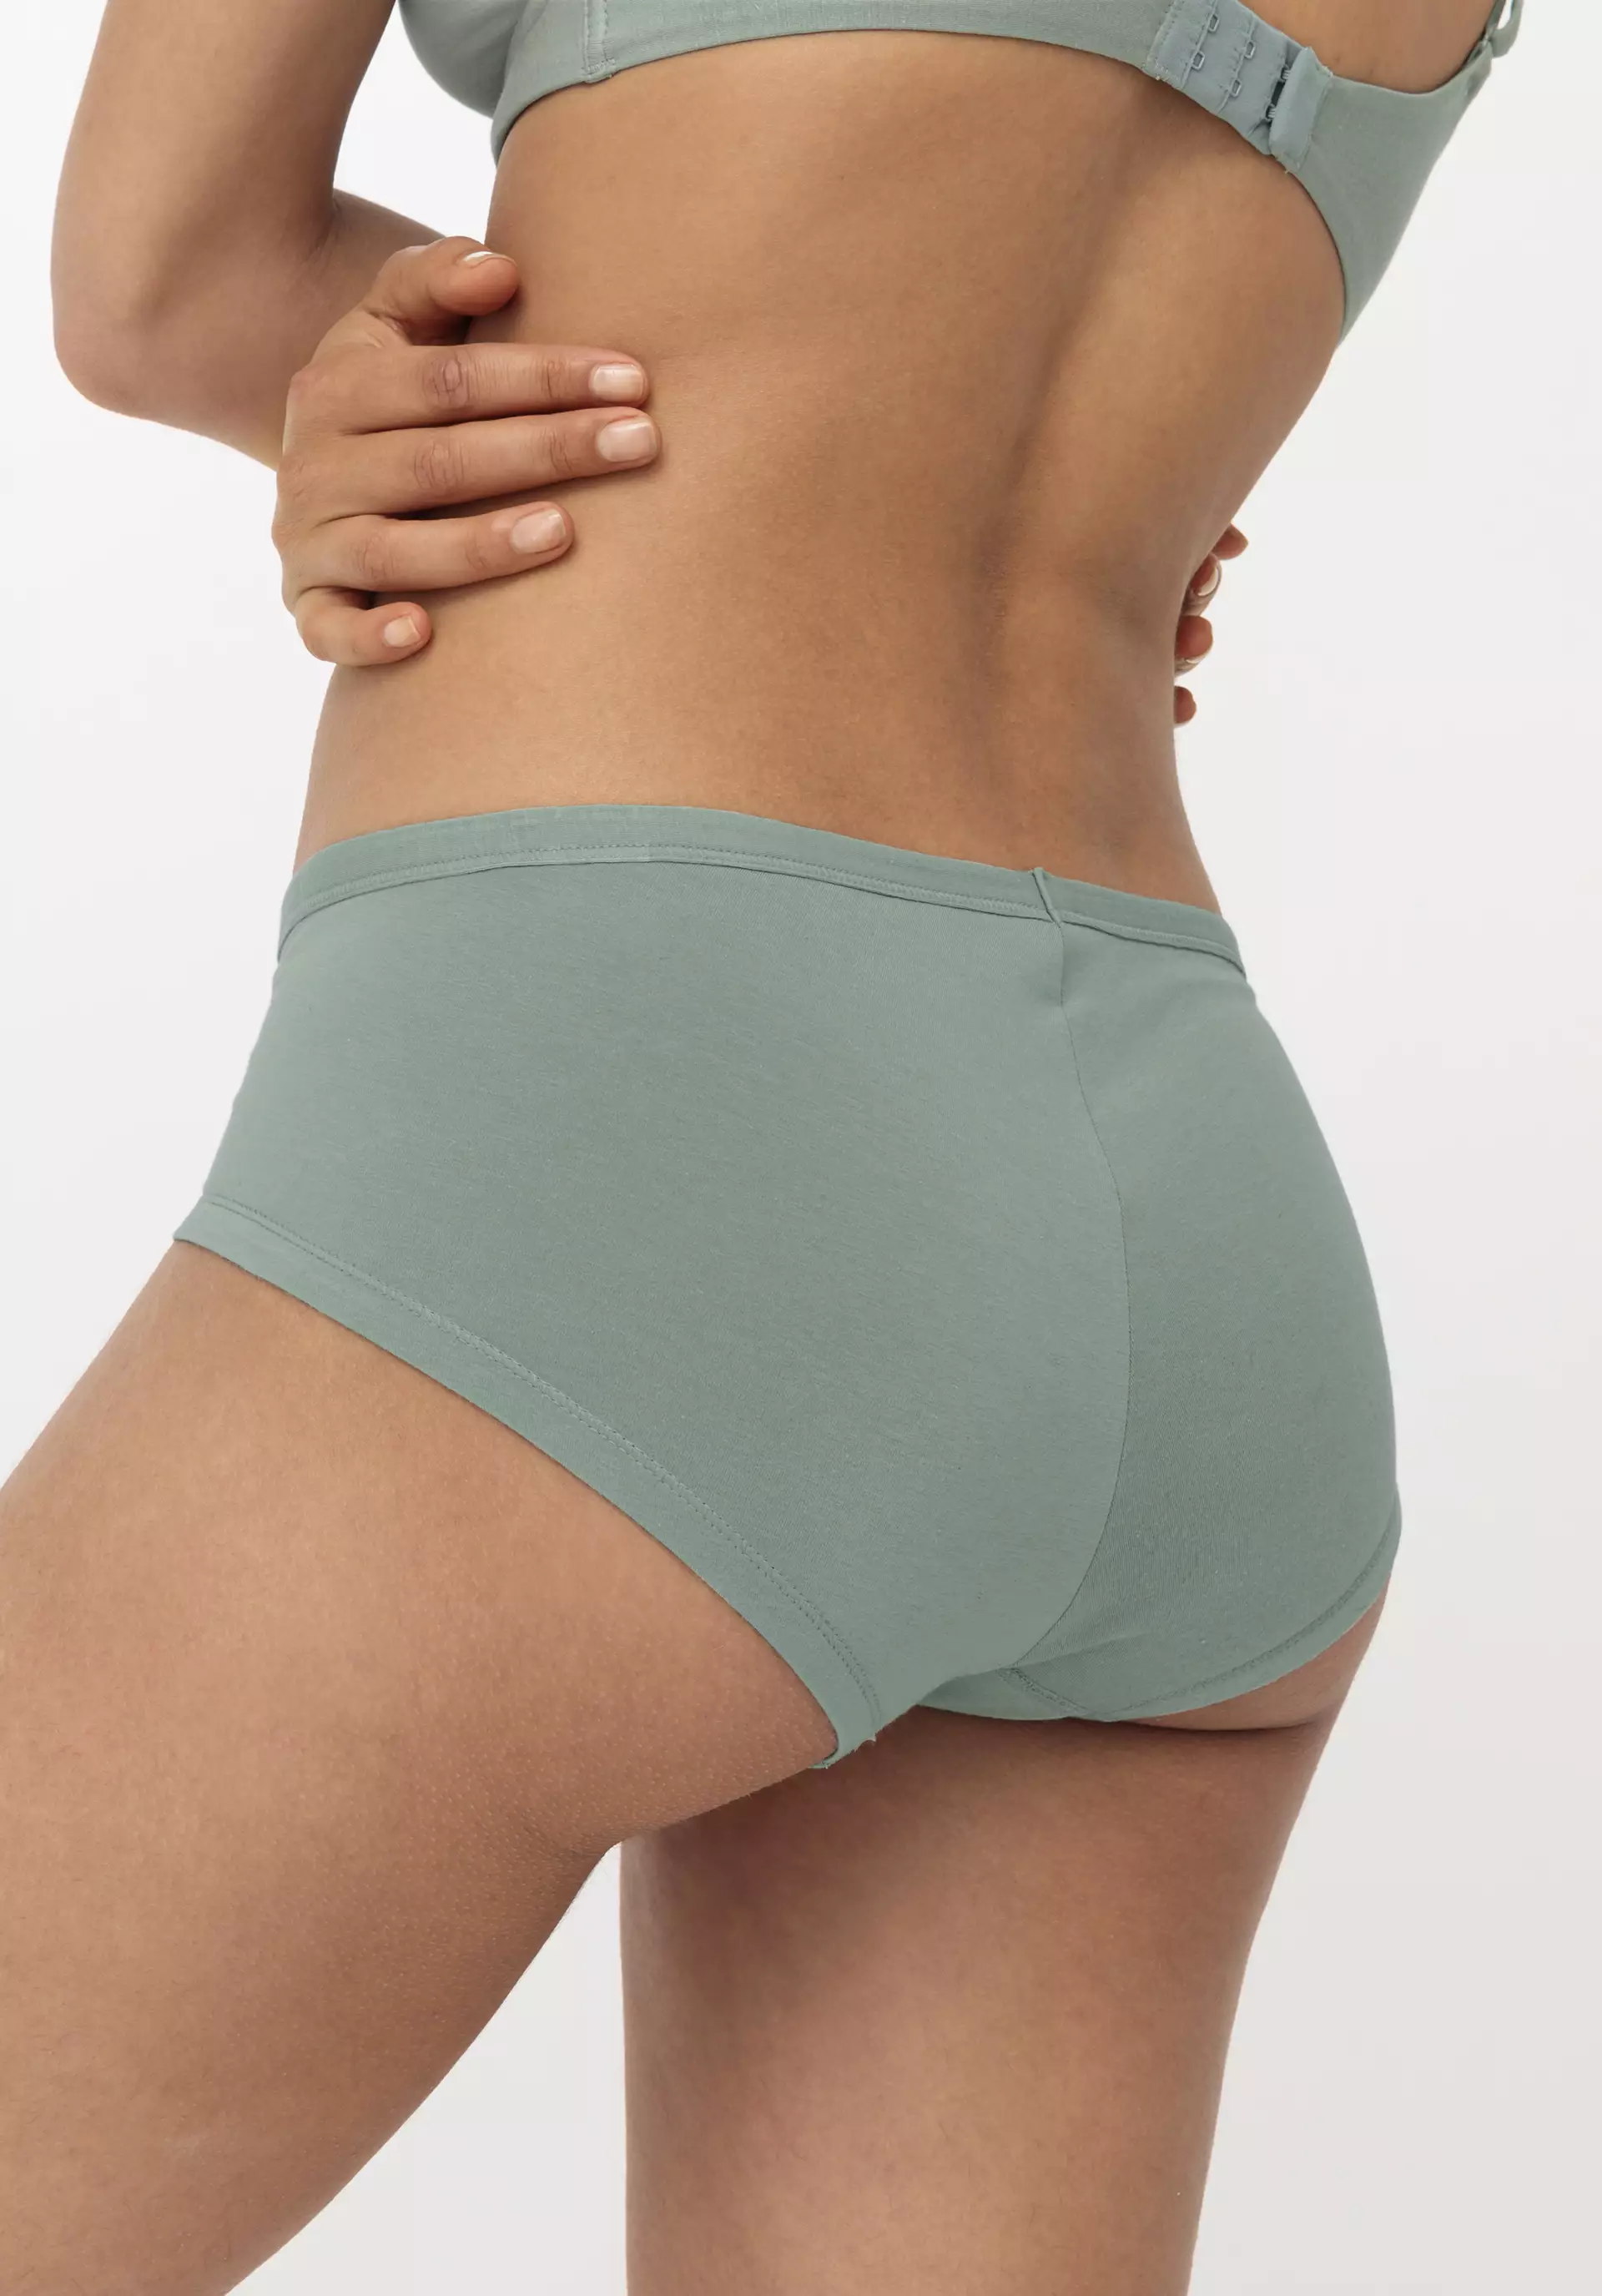 Panty low cut PURE BALANCE made of organic cotton and Tencel